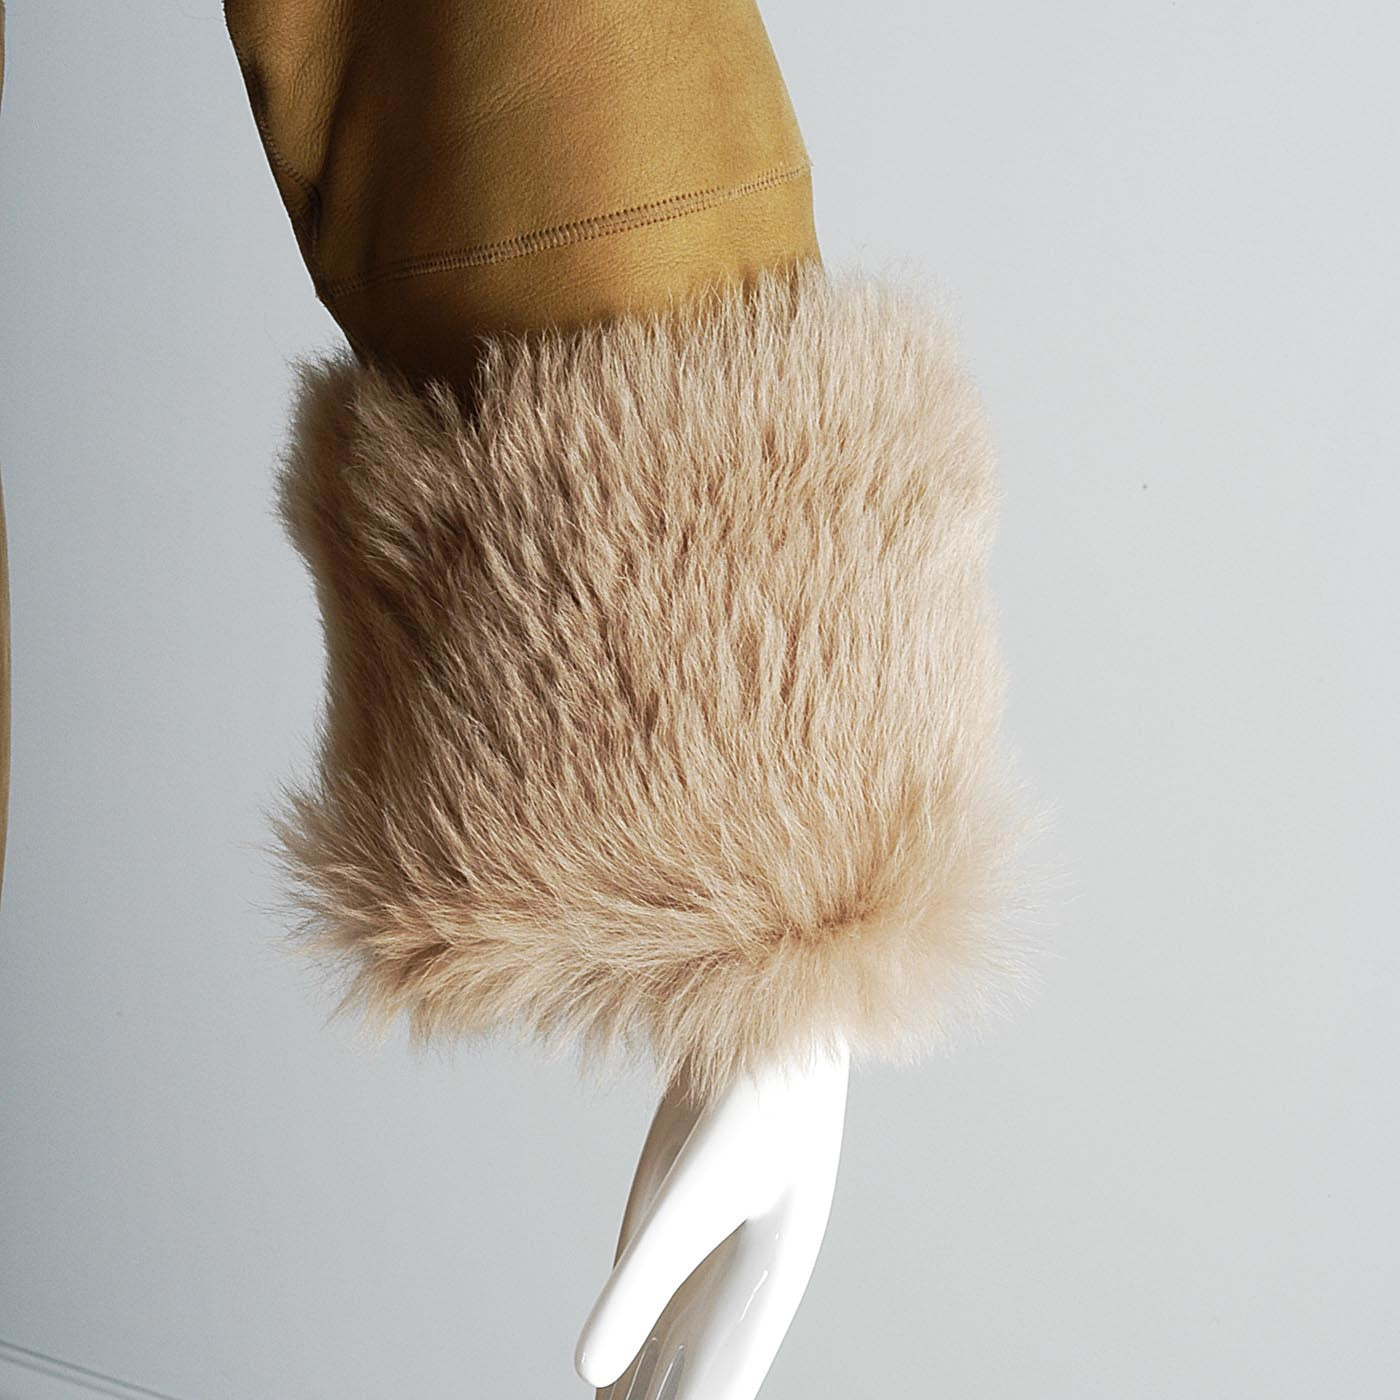 Bohemian Cole Haan Leather & Shearling Coat